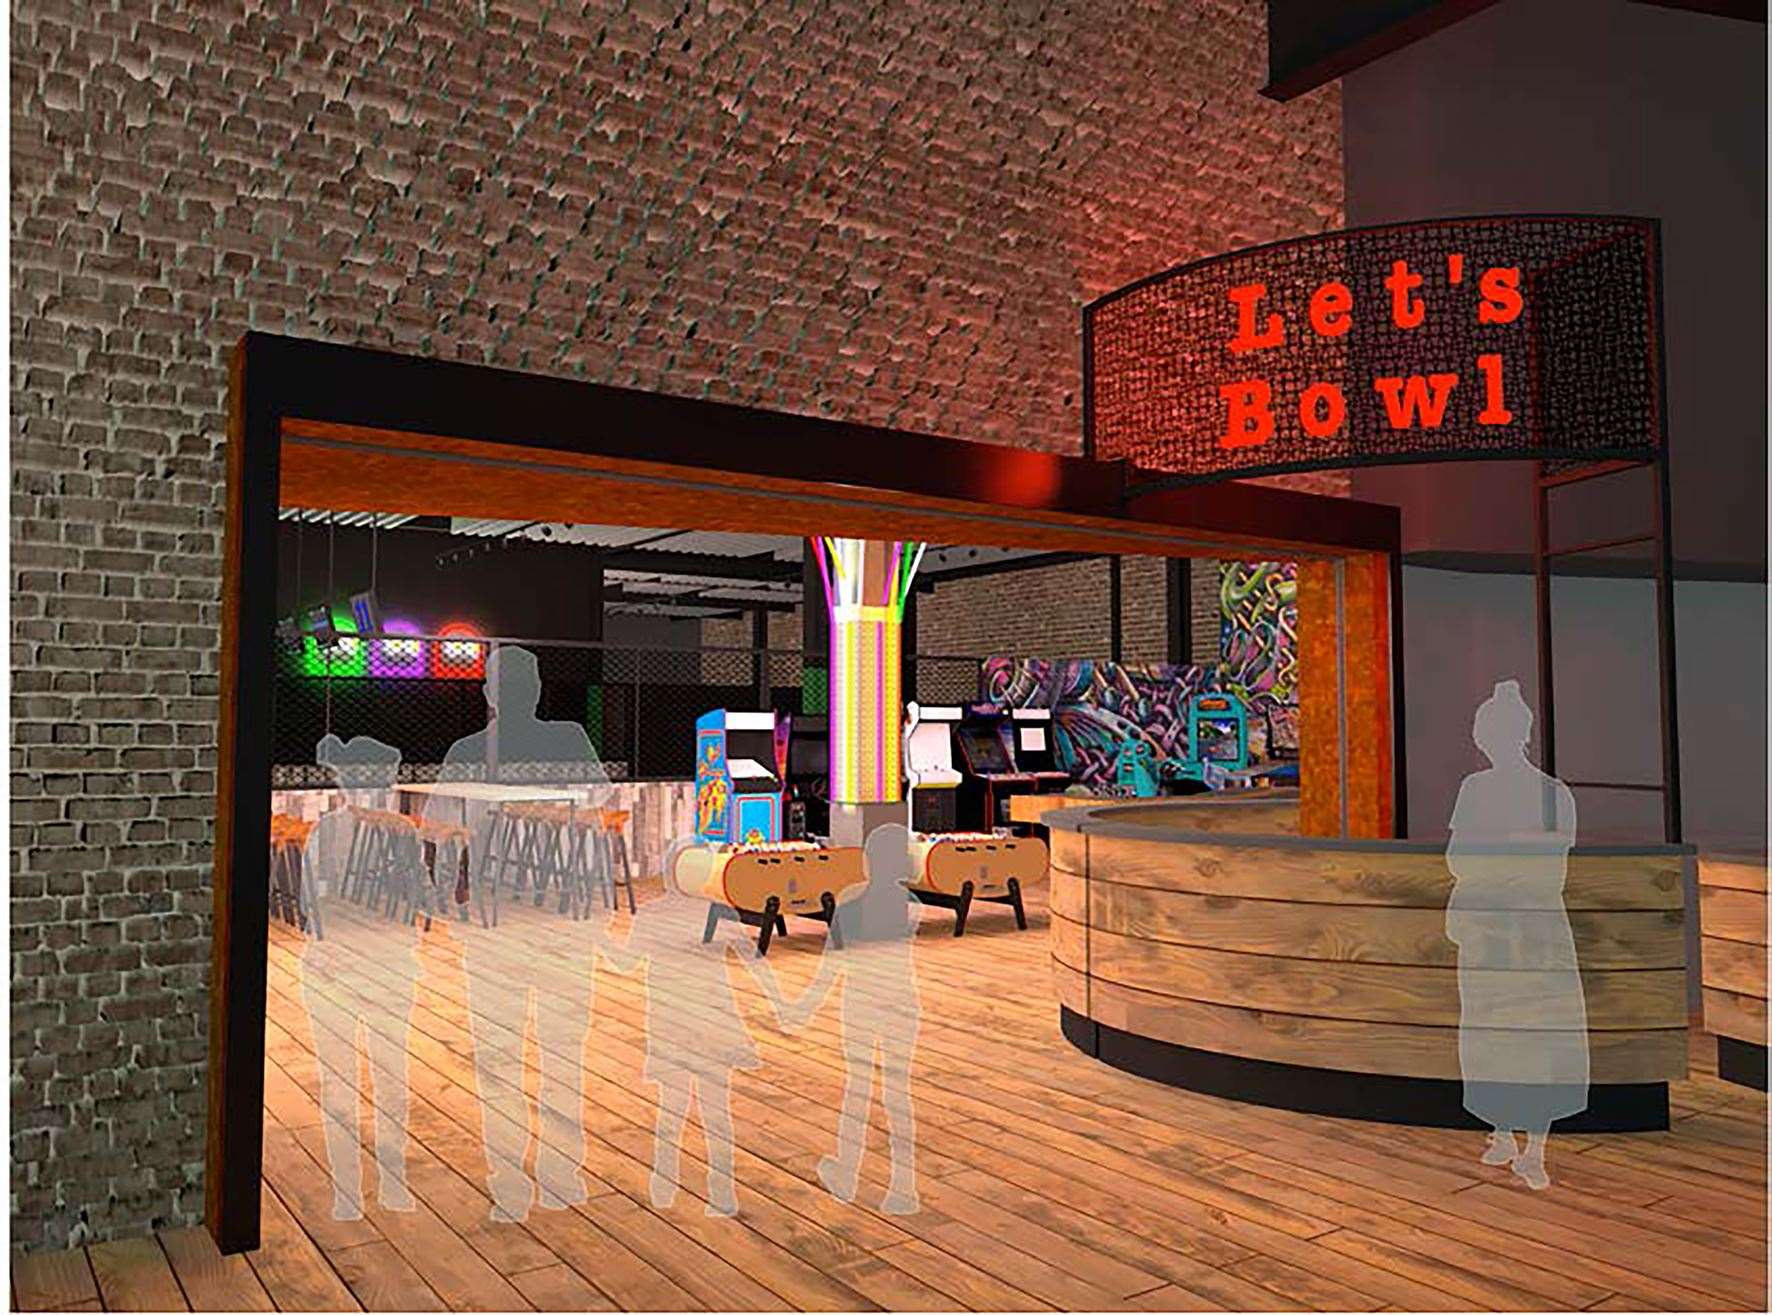 CGI pictures showing what the bowling alley entrance could look like